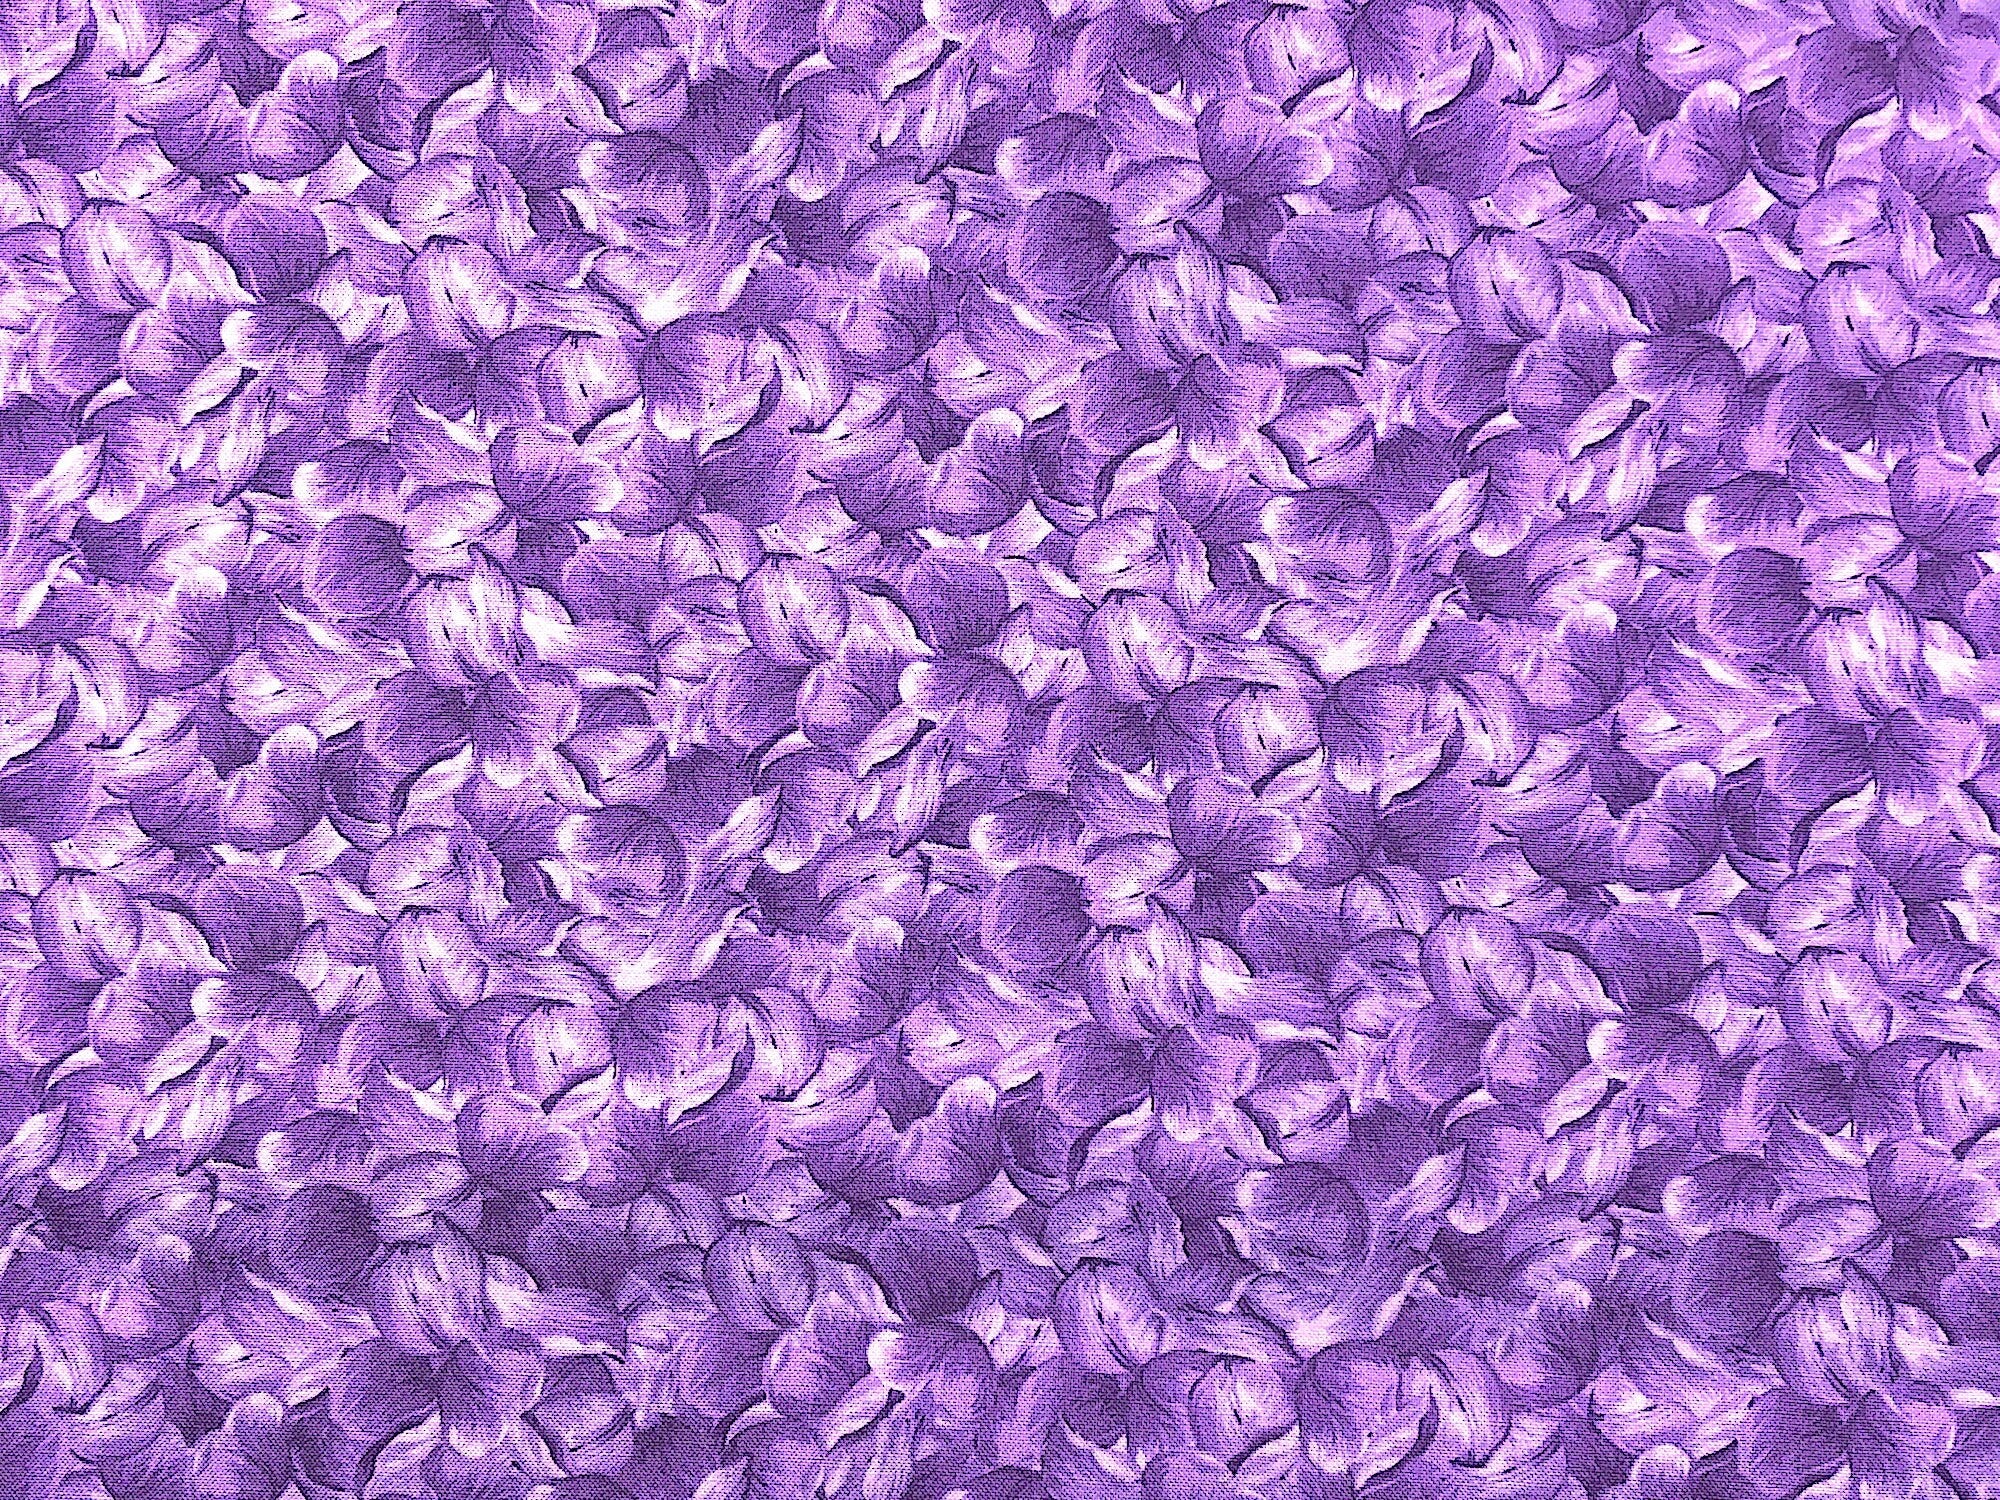 This fabric is a part of the Elegant Blooms collection and is covered in flower petals